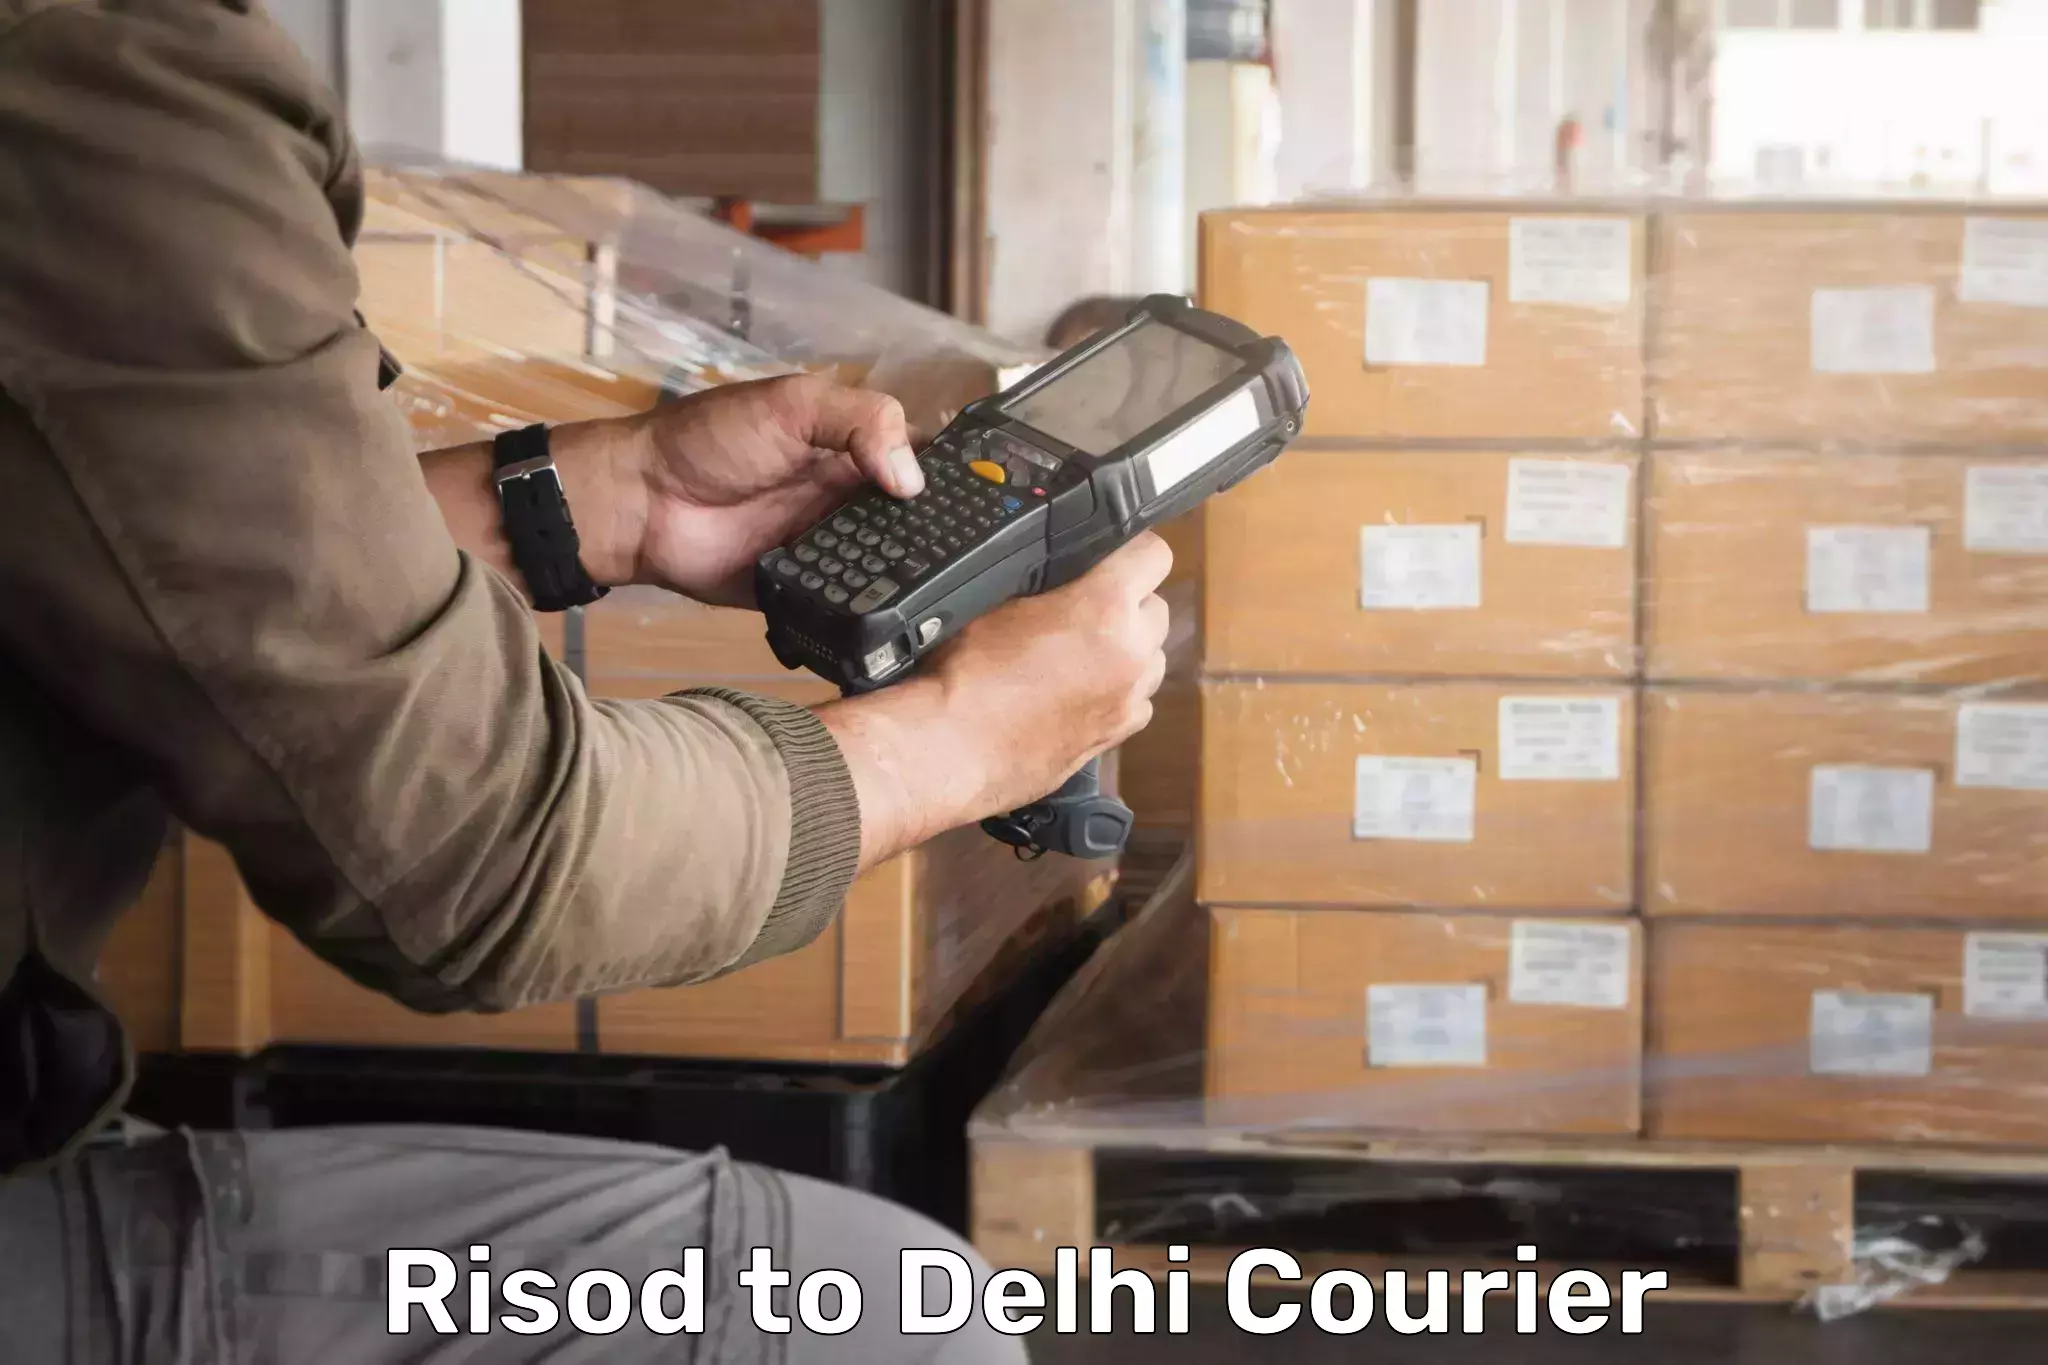 State-of-the-art courier technology Risod to NCR